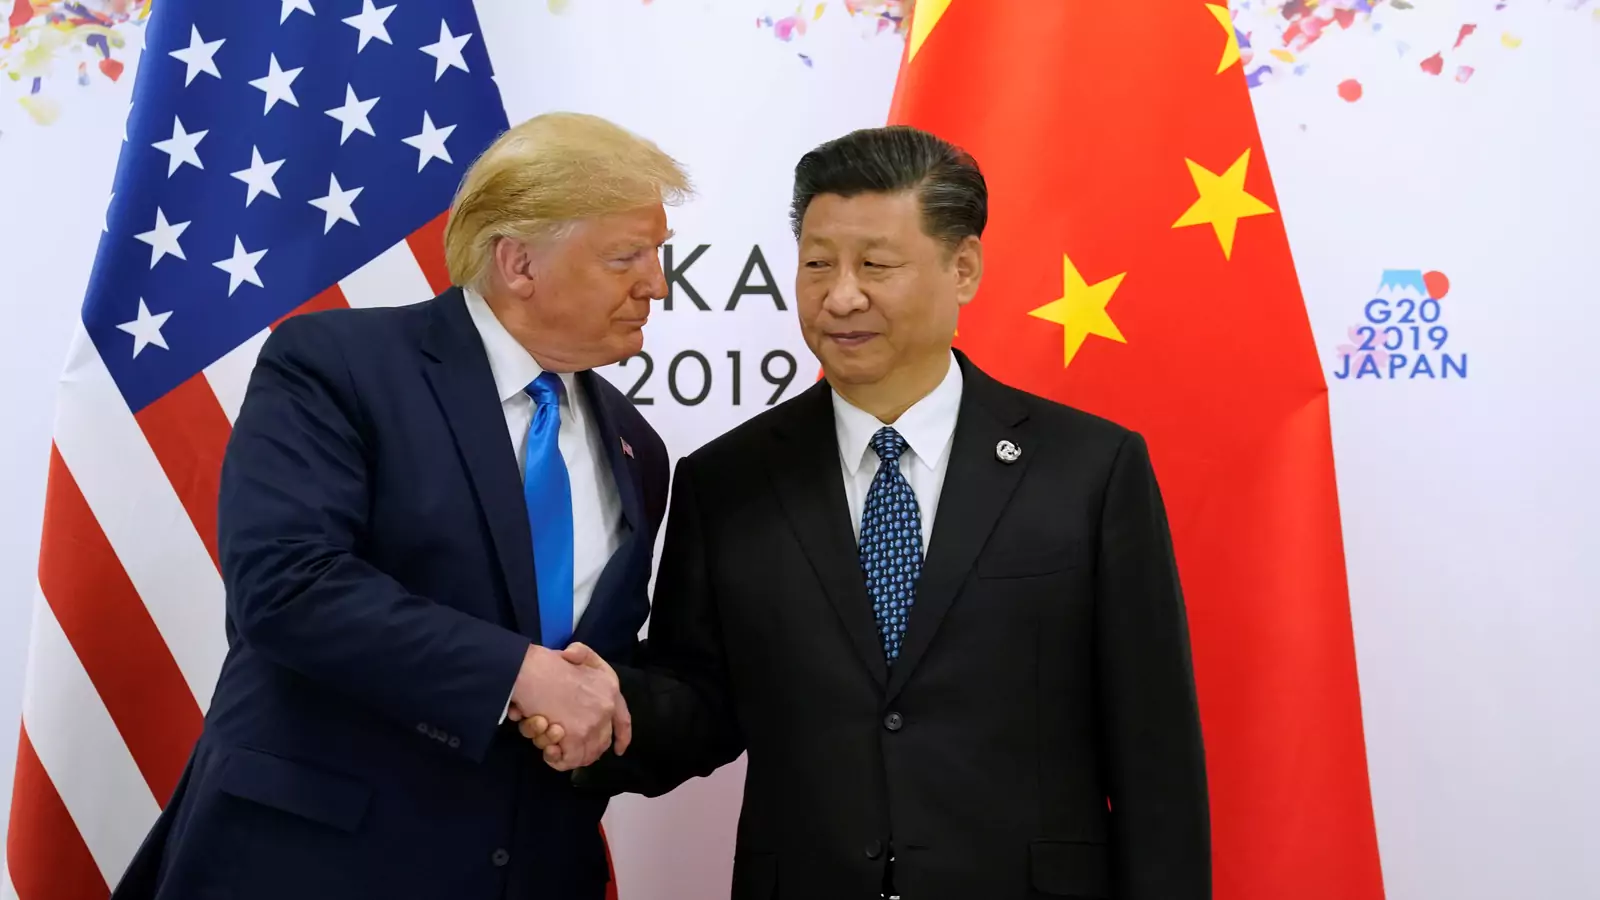 U.S. President Donald Trump and China's President Xi Jinping shake hands ahead of their bilateral meeting during the G20 leaders summit in Osaka, Japan, June 29, 2019. 